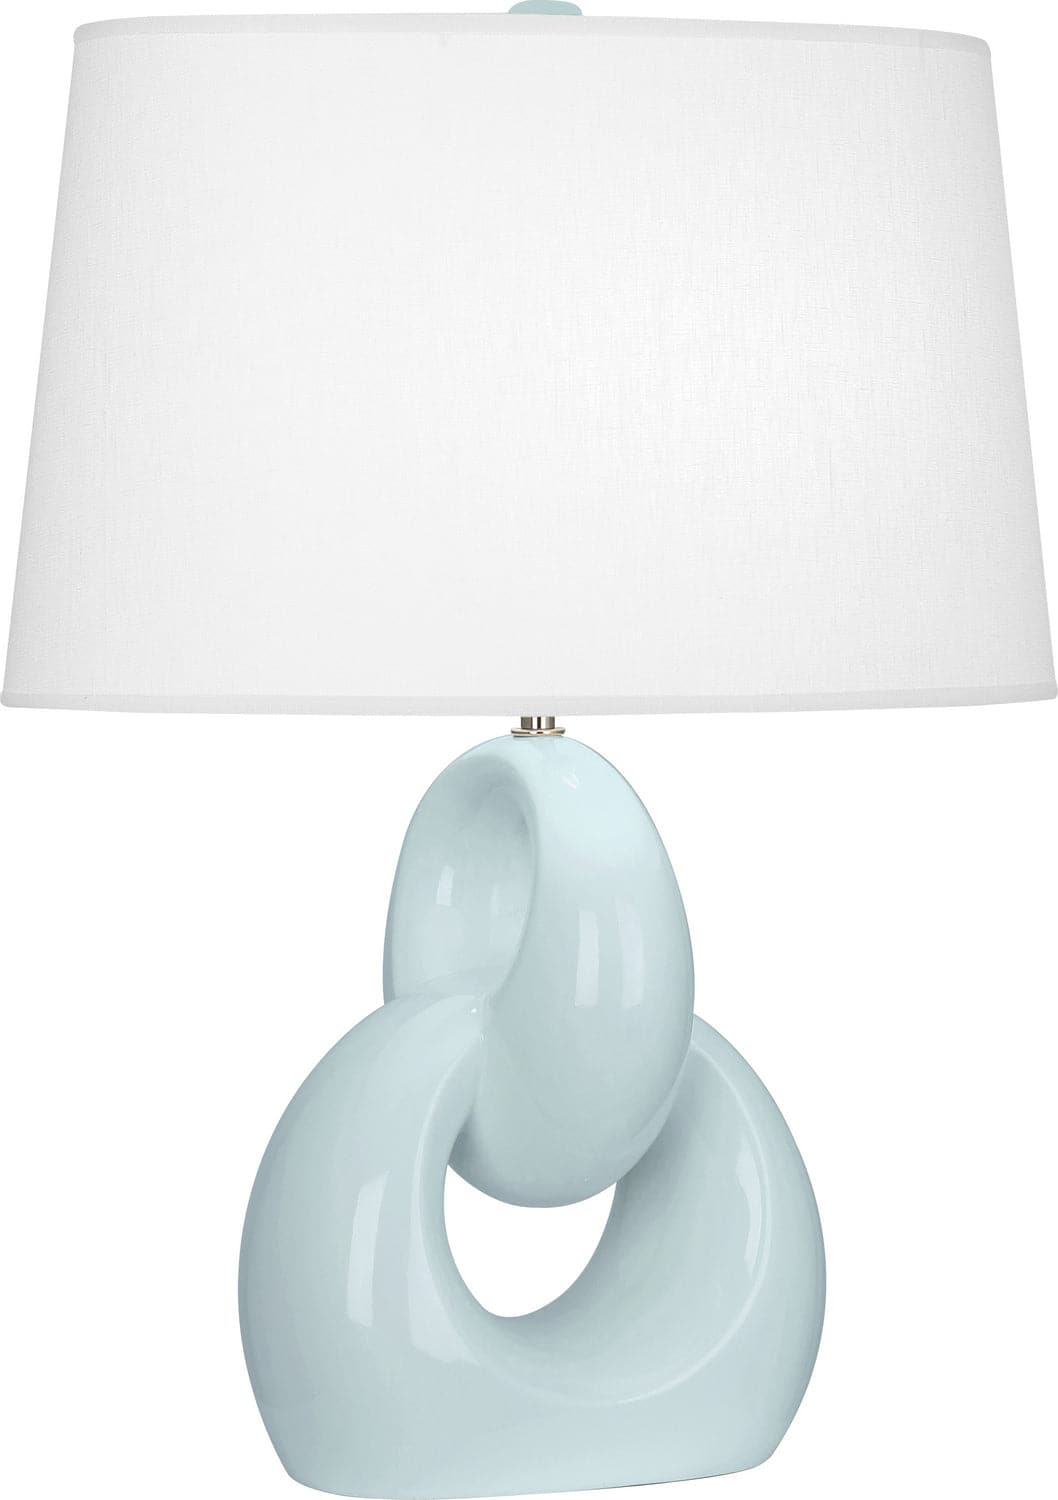 Robert Abbey - BB981 - One Light Table Lamp - Fusion - Baby Blue Glazed w/Polished Nickel